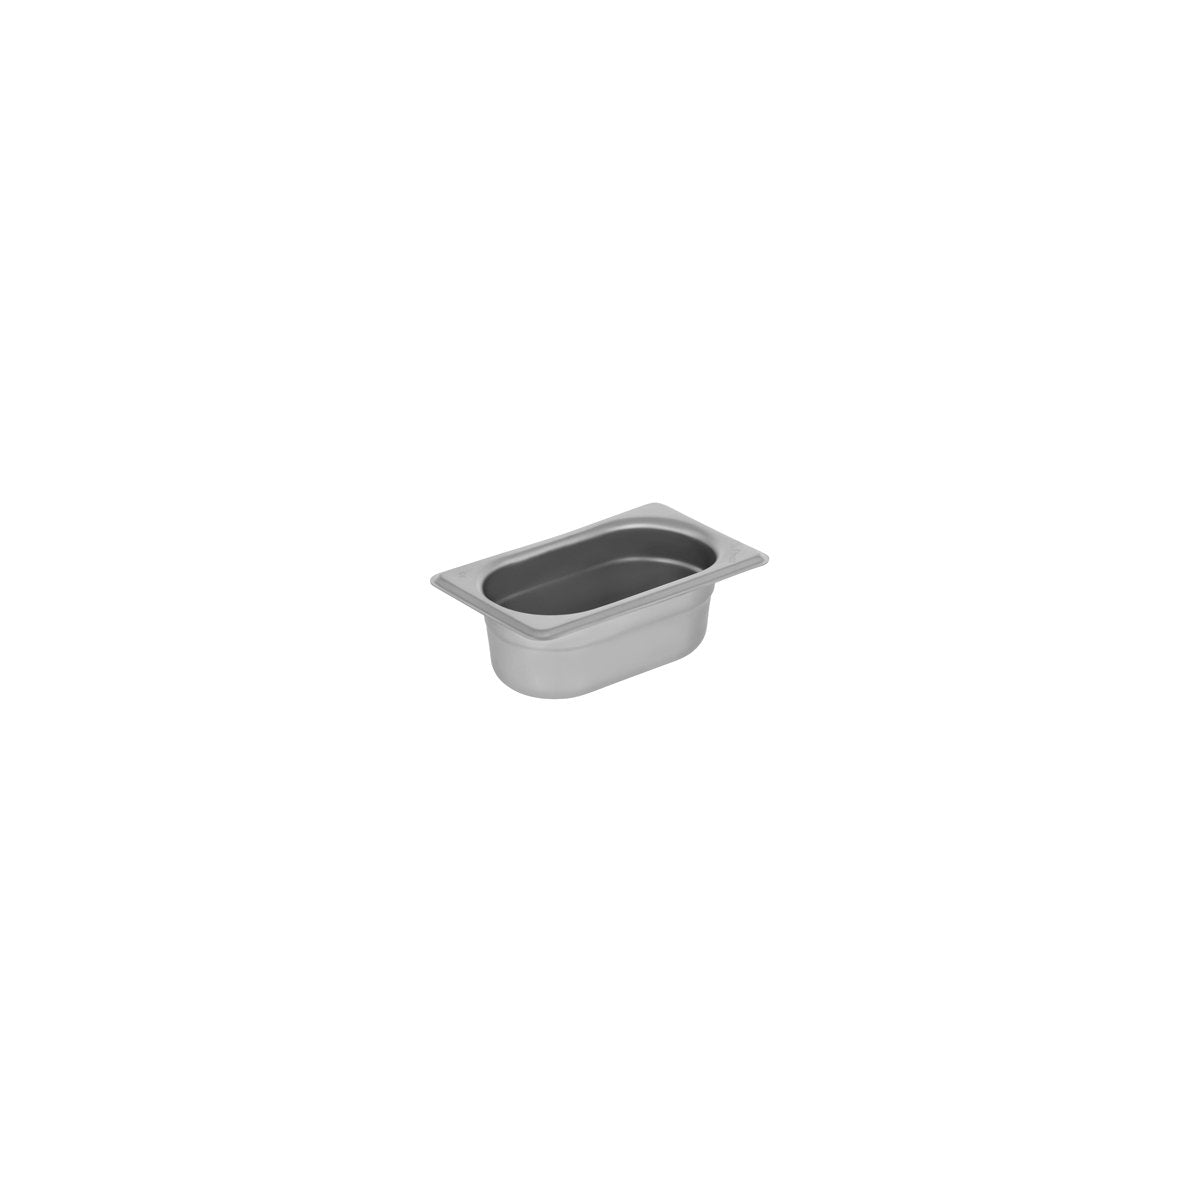 GN-19065 Chef Inox Gastronorm Pan 1/9 Size 65mm Tomkin Australia Hospitality Supplies